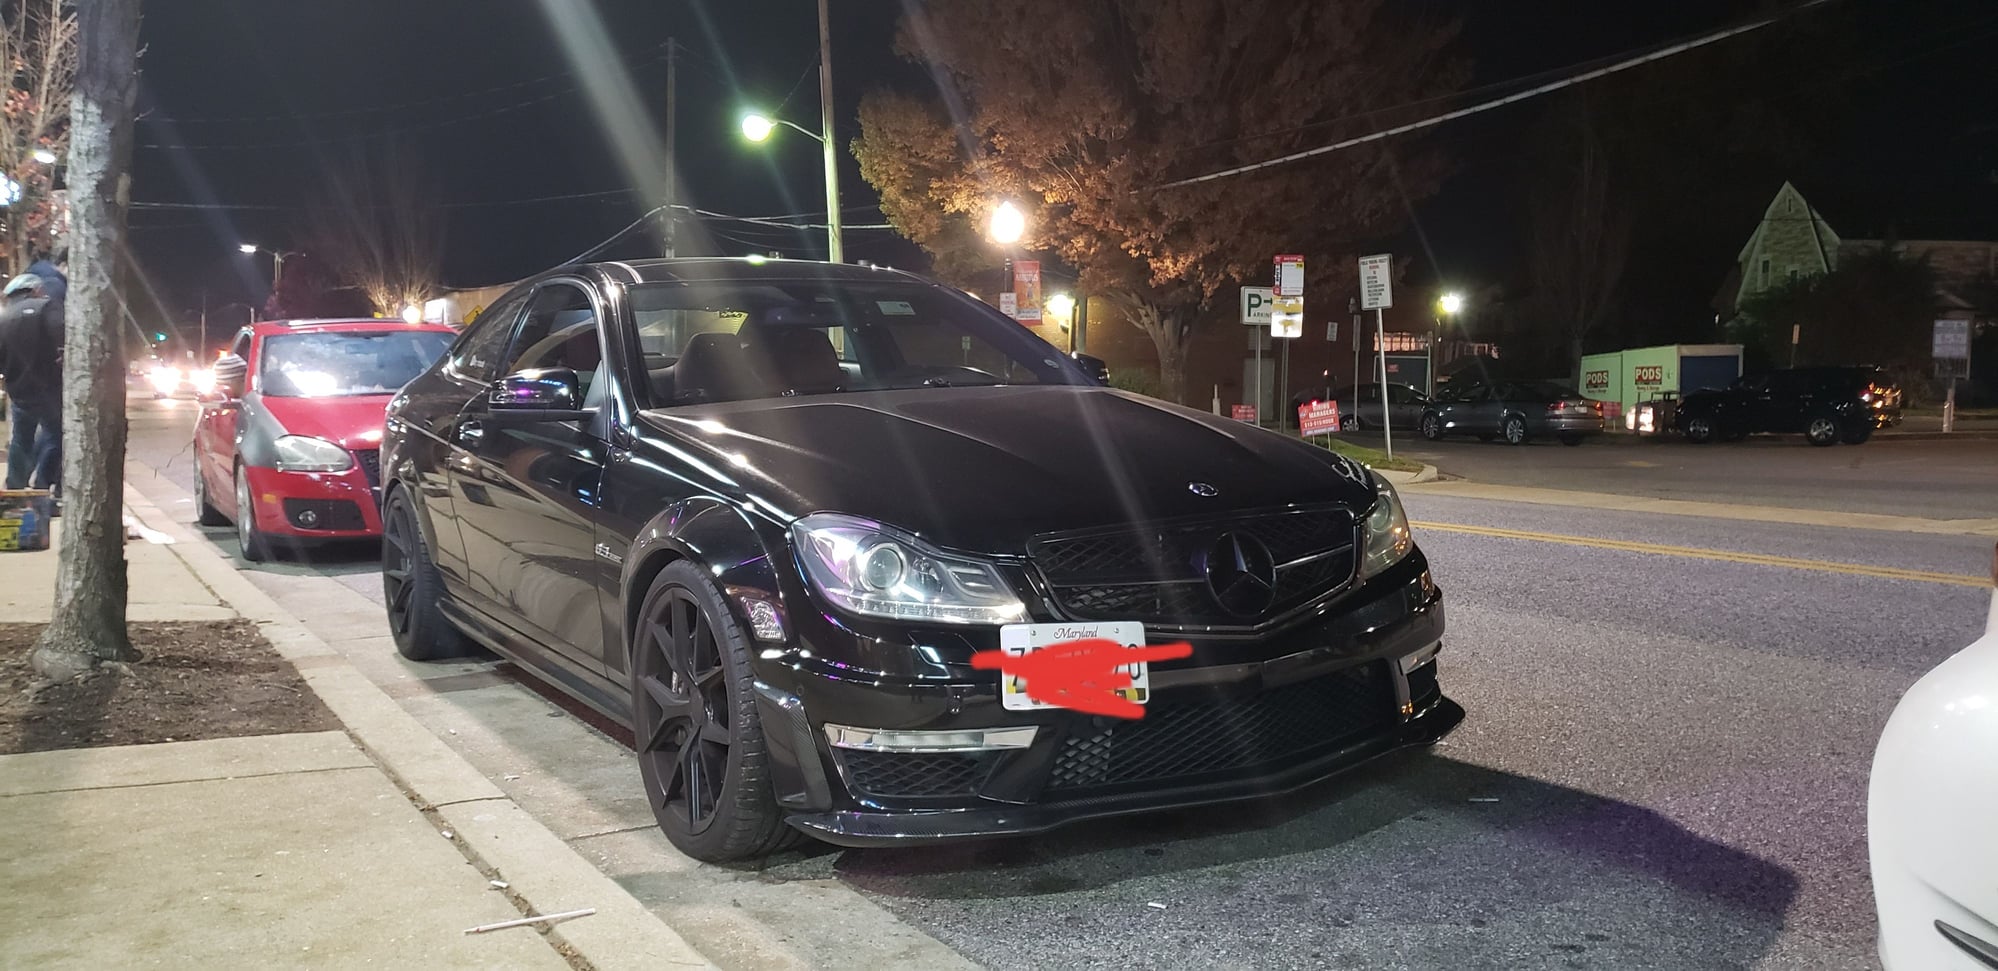 2012 Mercedes-Benz C63 AMG - 2012 C63 amg coupe - Used - VIN WDDGJ7HB9CF771378 - 126,000 Miles - 8 cyl - 2WD - Automatic - Coupe - Black - Catonsville, MD 21228, United States